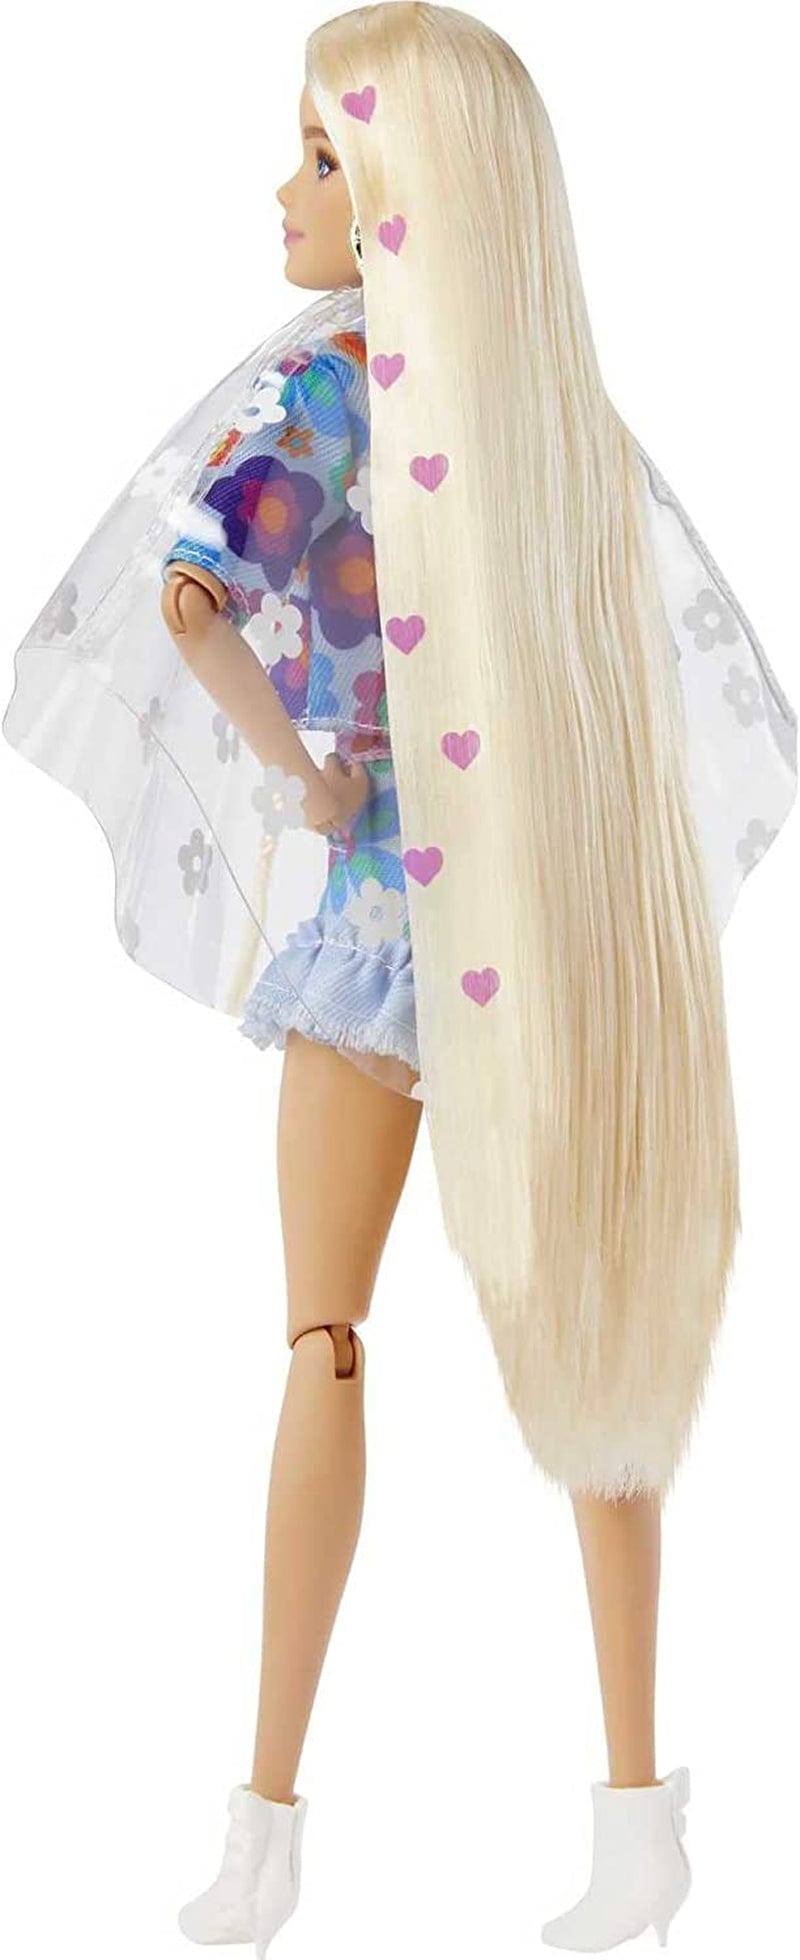 Barbie Dolls and Accessories, Barbie Extra Fashion Doll, Long Blonde Hair with Heart Icons and Pet Bunny, Floral Fashion, Toys and Gifts for Kids Sporting Goods > Outdoor Recreation > Winter Sports & Activities Mattel   